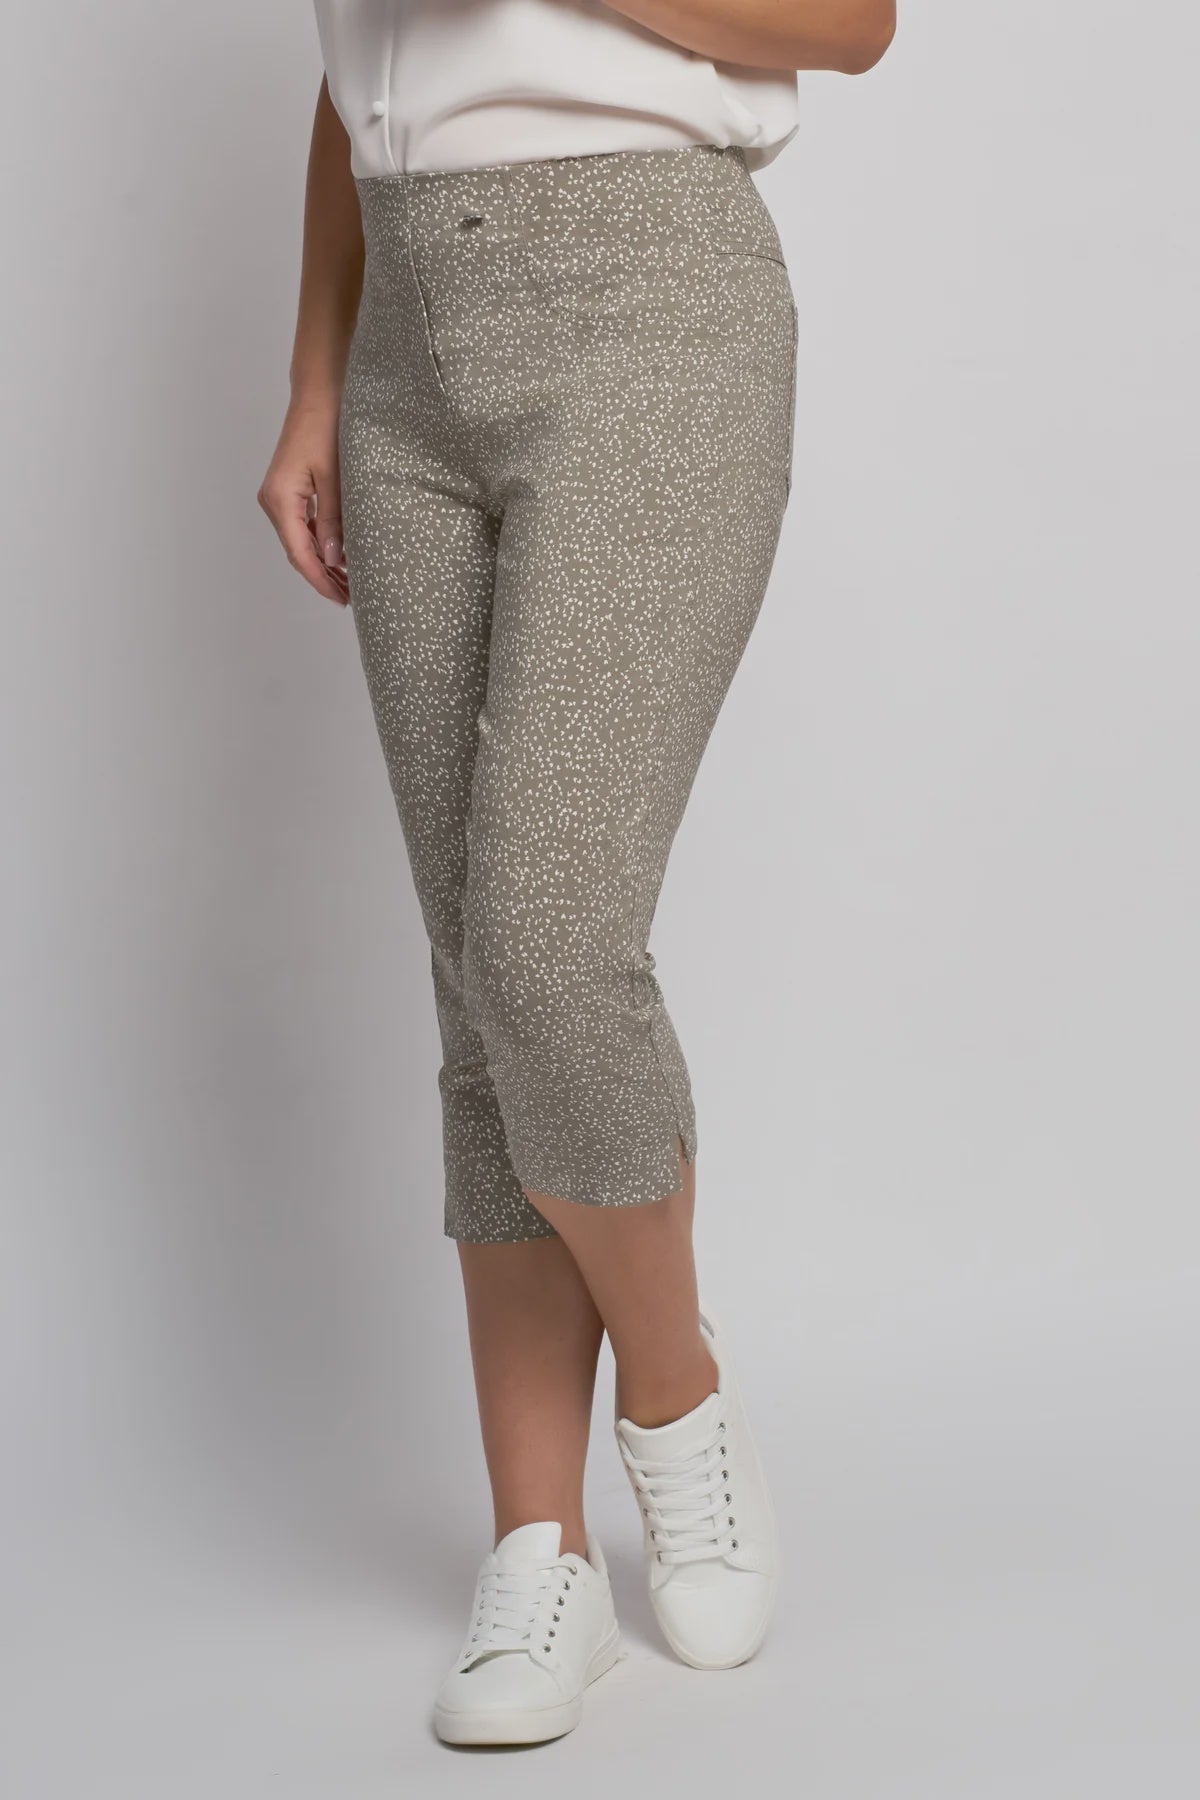 Pinns crop length pull on trousers  in sage animal